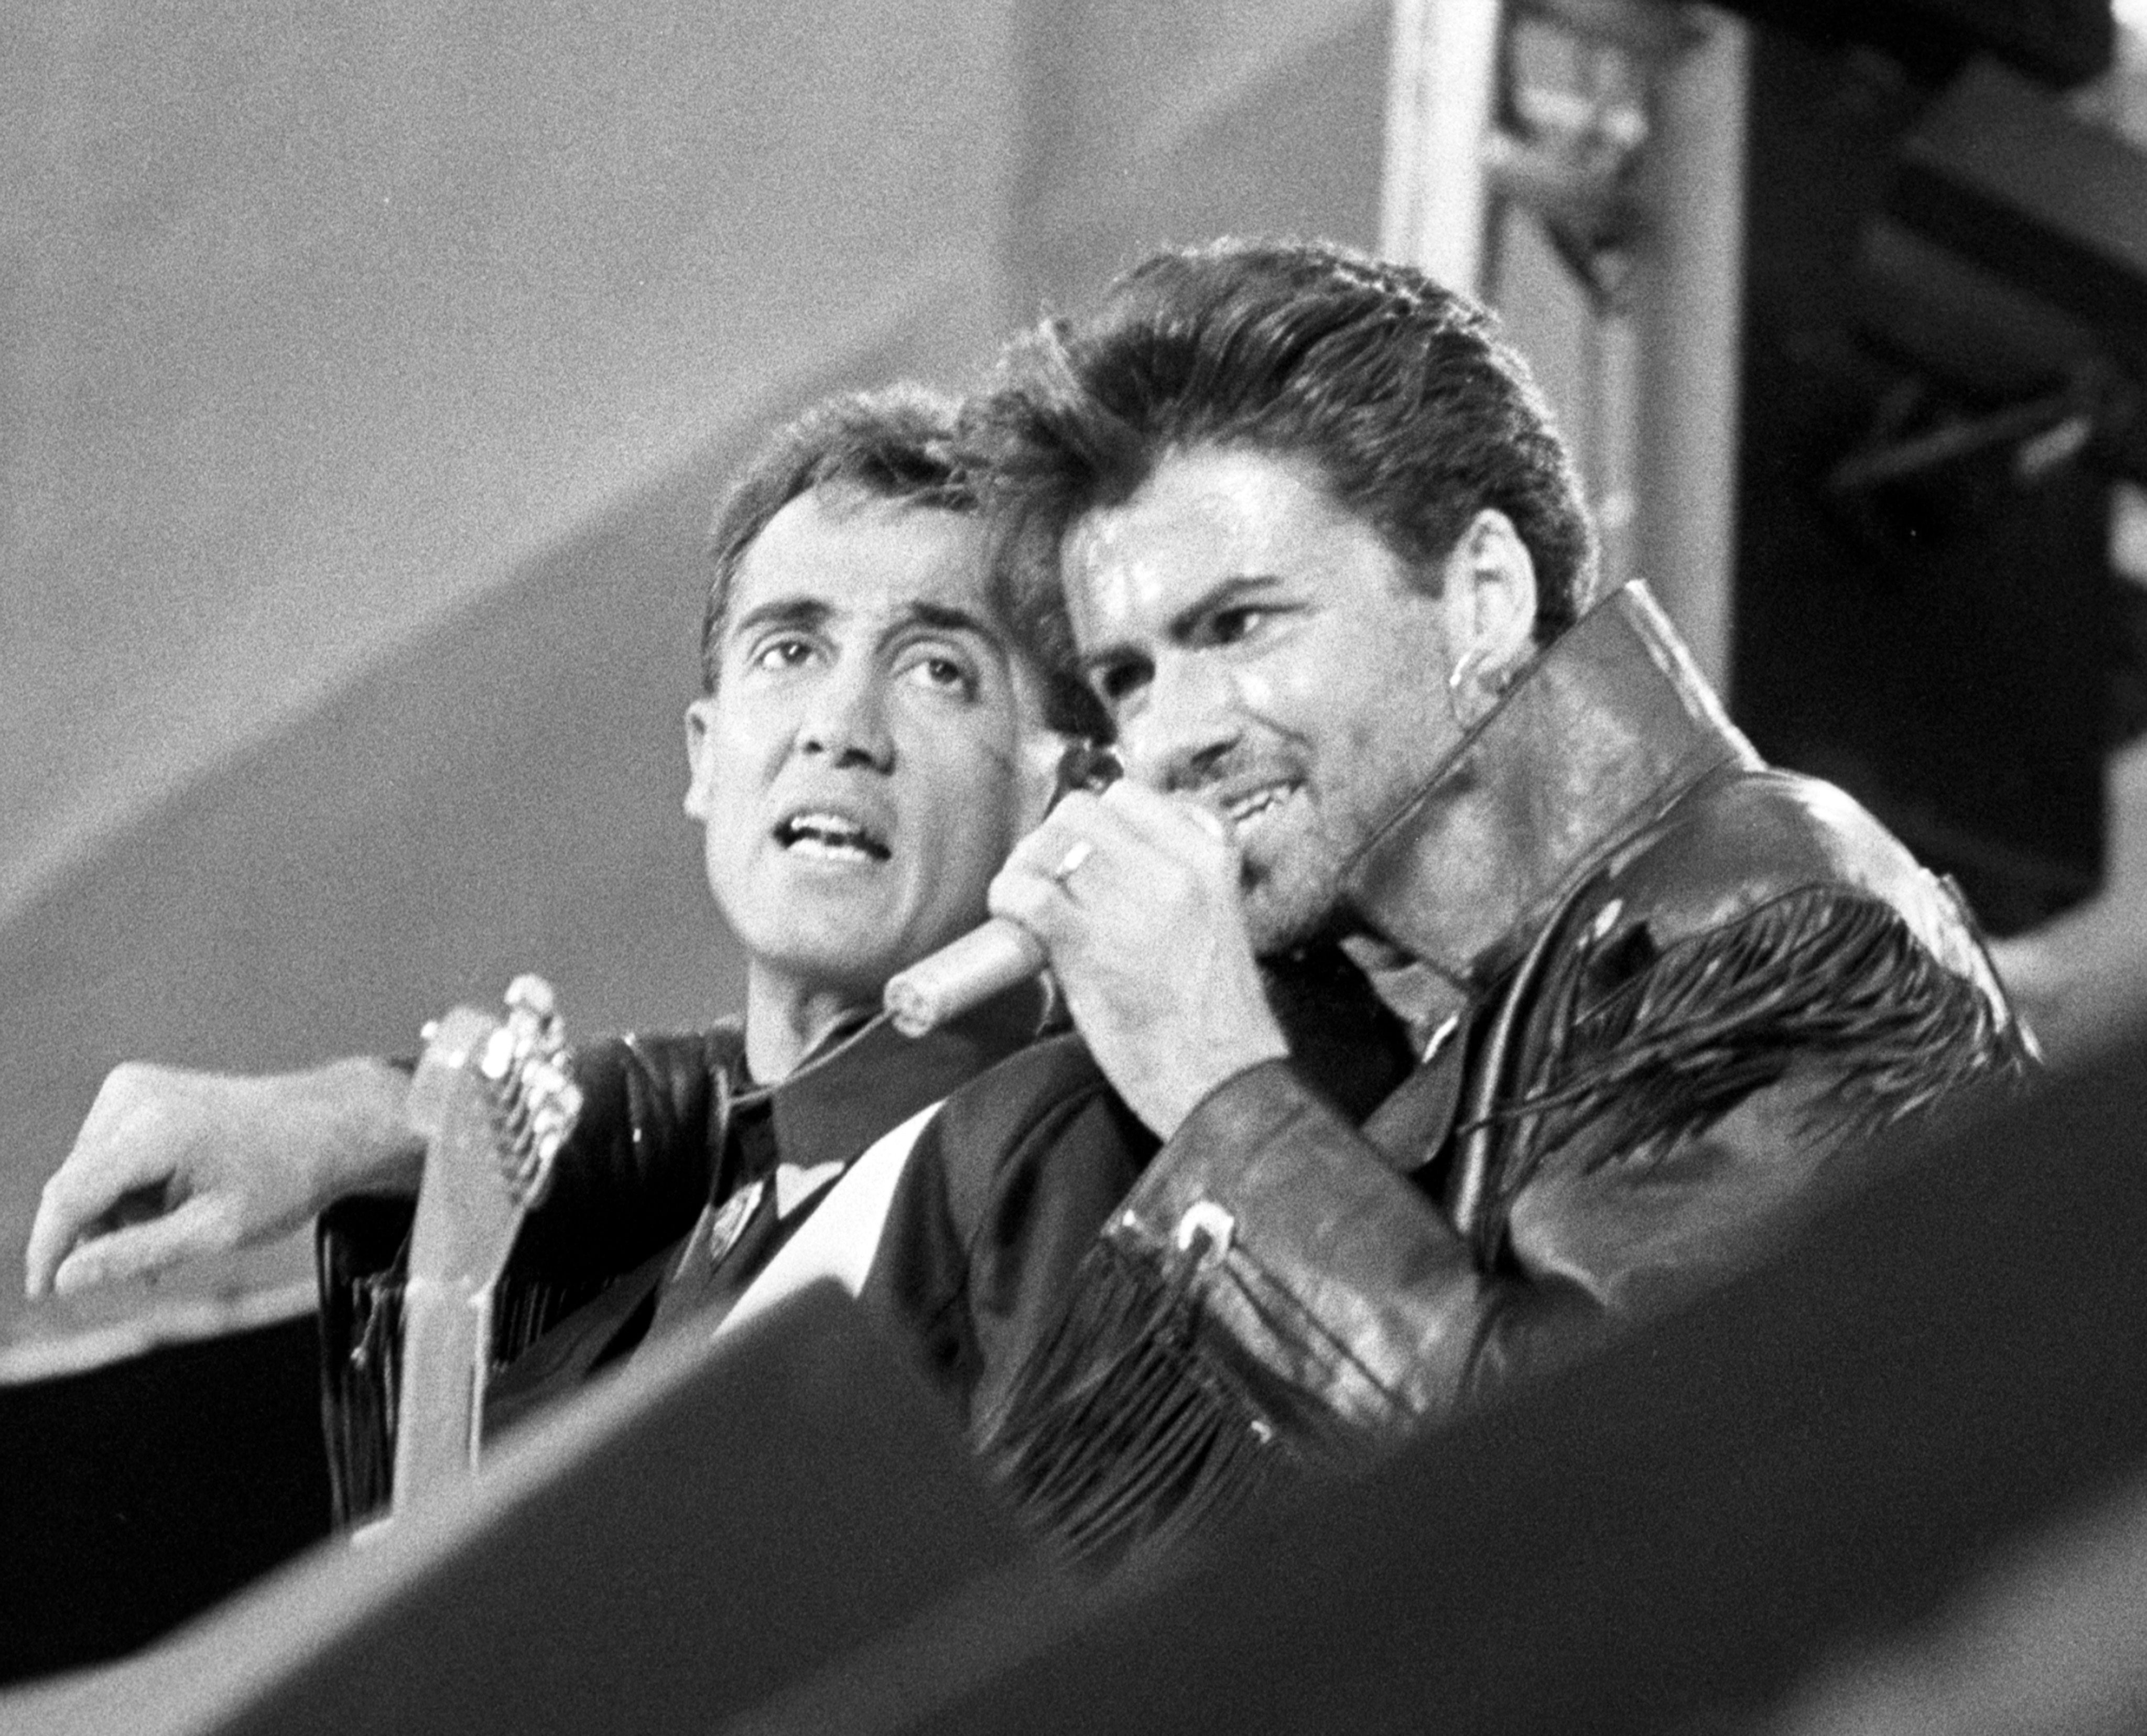 Ridgeley (left) and Michael on stage in 1986, the year ‘Last Christmas’ was released